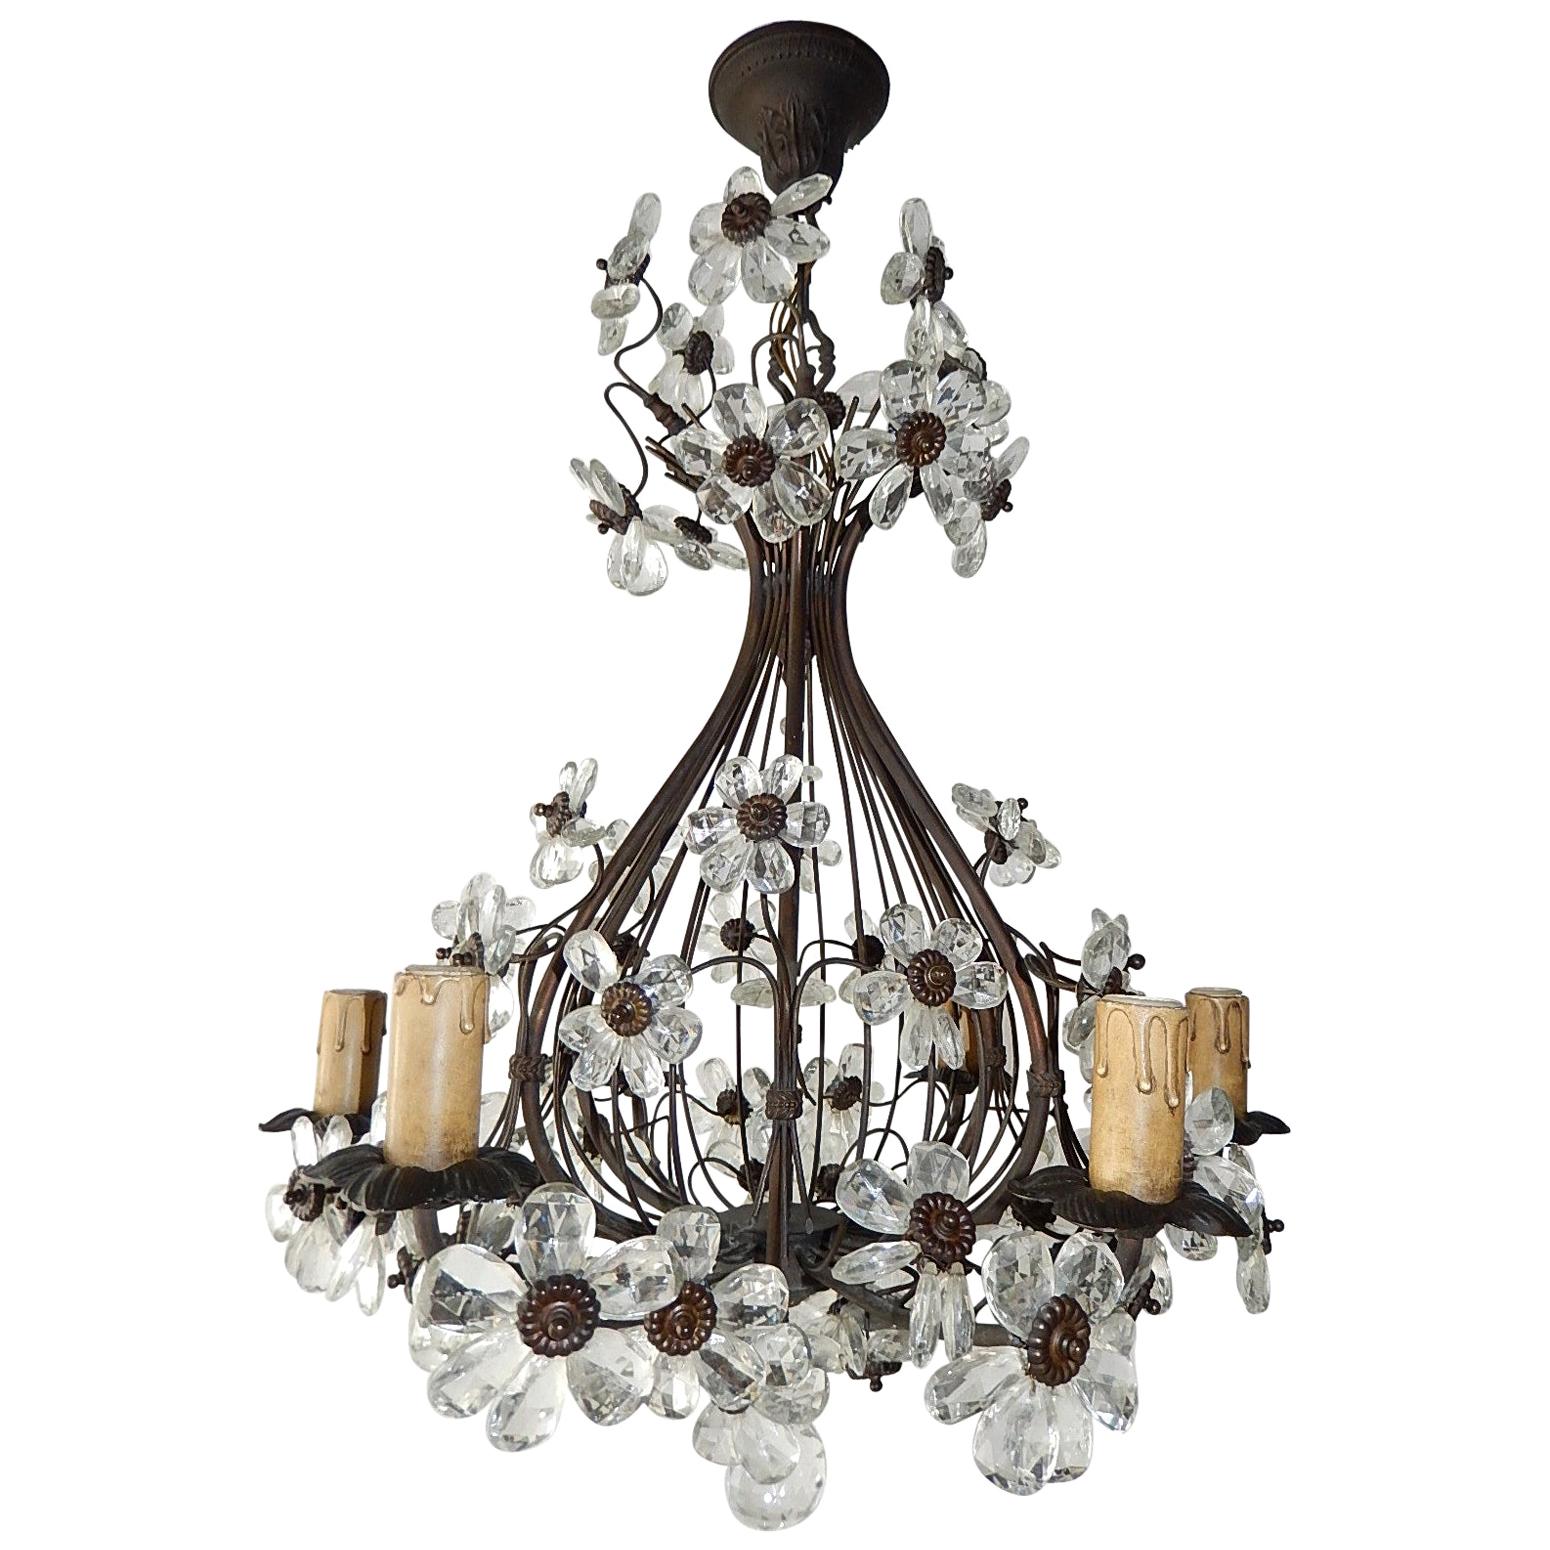 French Maison Baguès Style Crystal Prisms Flowers Bronze Chandelier, circa 1930